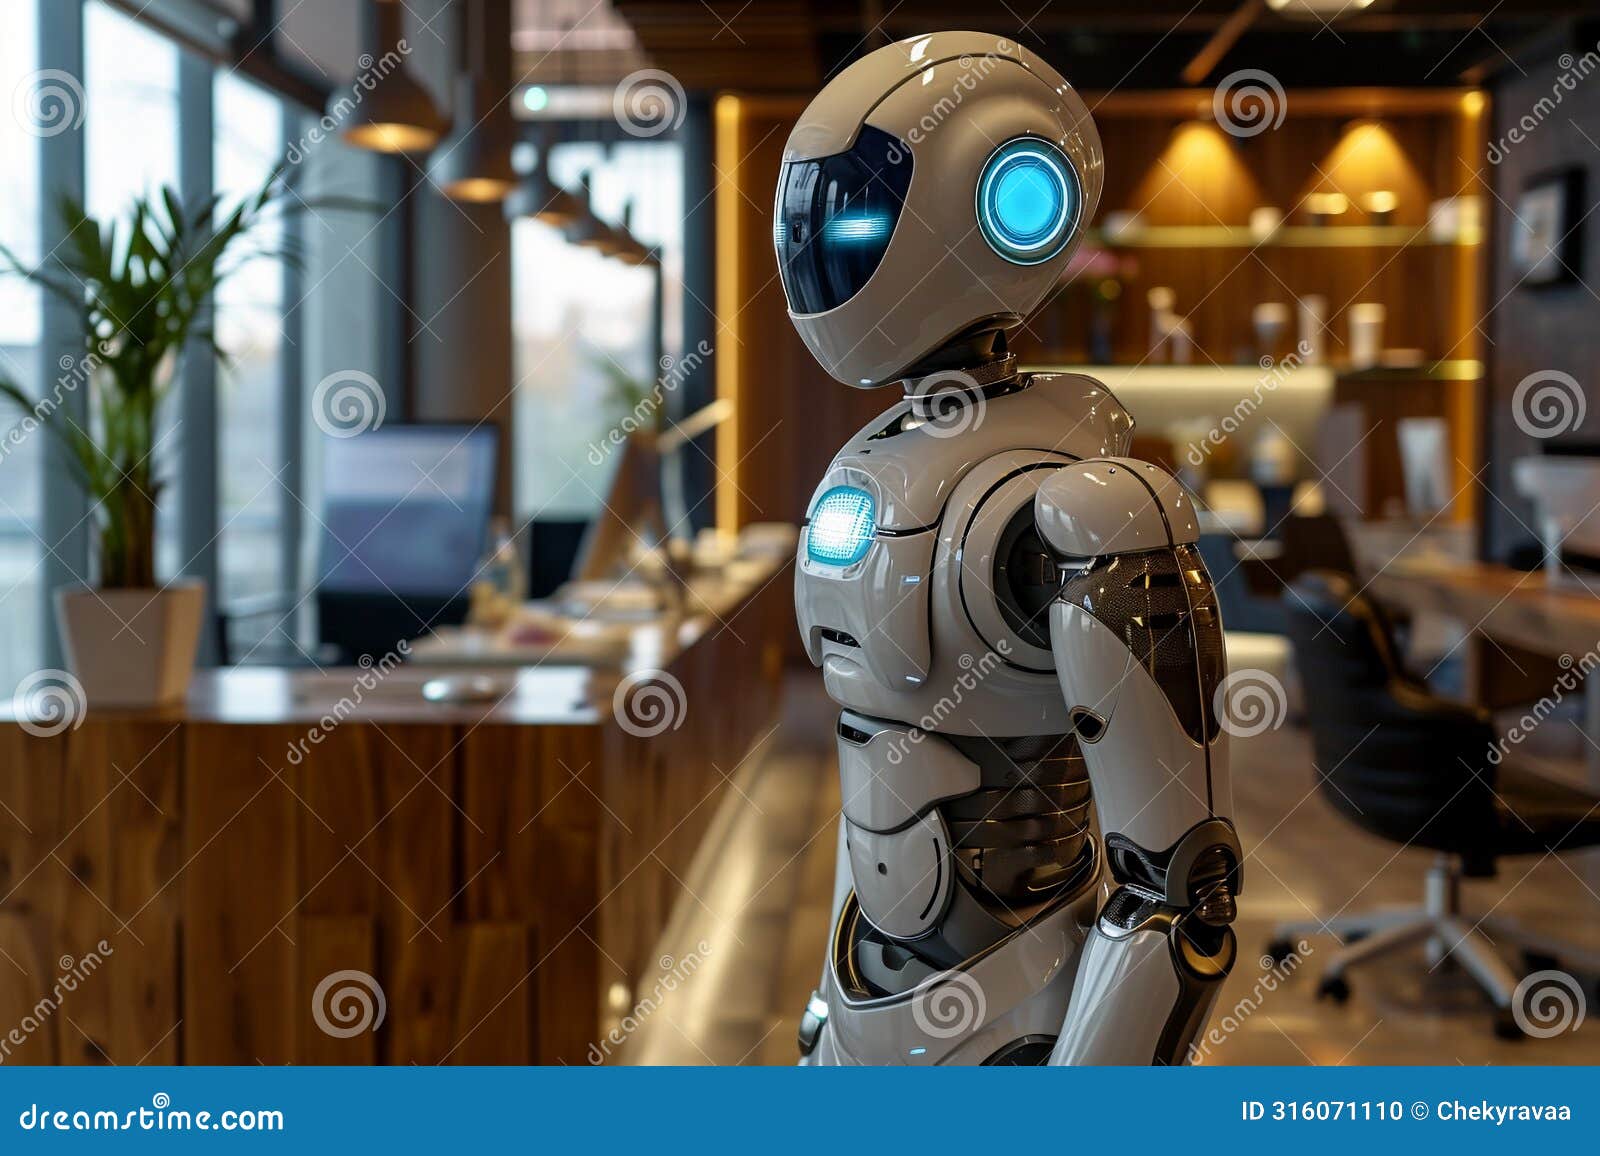 robot works in the office, with laptop, blurred background. artificial intelect in future life.